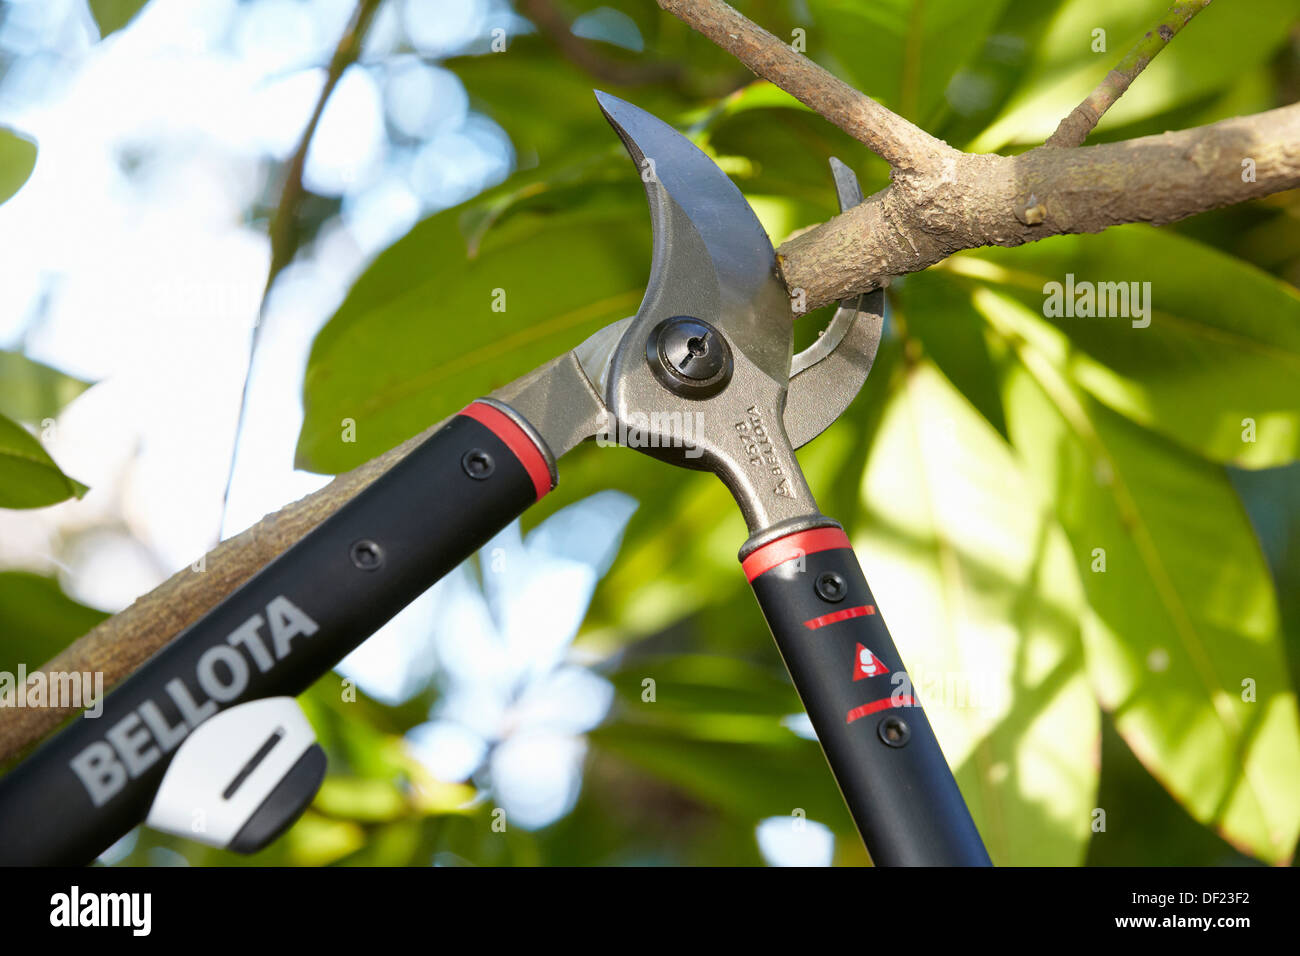 Cutting of tree branches, Pruning secateur, hand tool for agriculture,  Donostia, San Sebastian, Gipuzkoa, Basque Country, Spain Stock Photo - Alamy